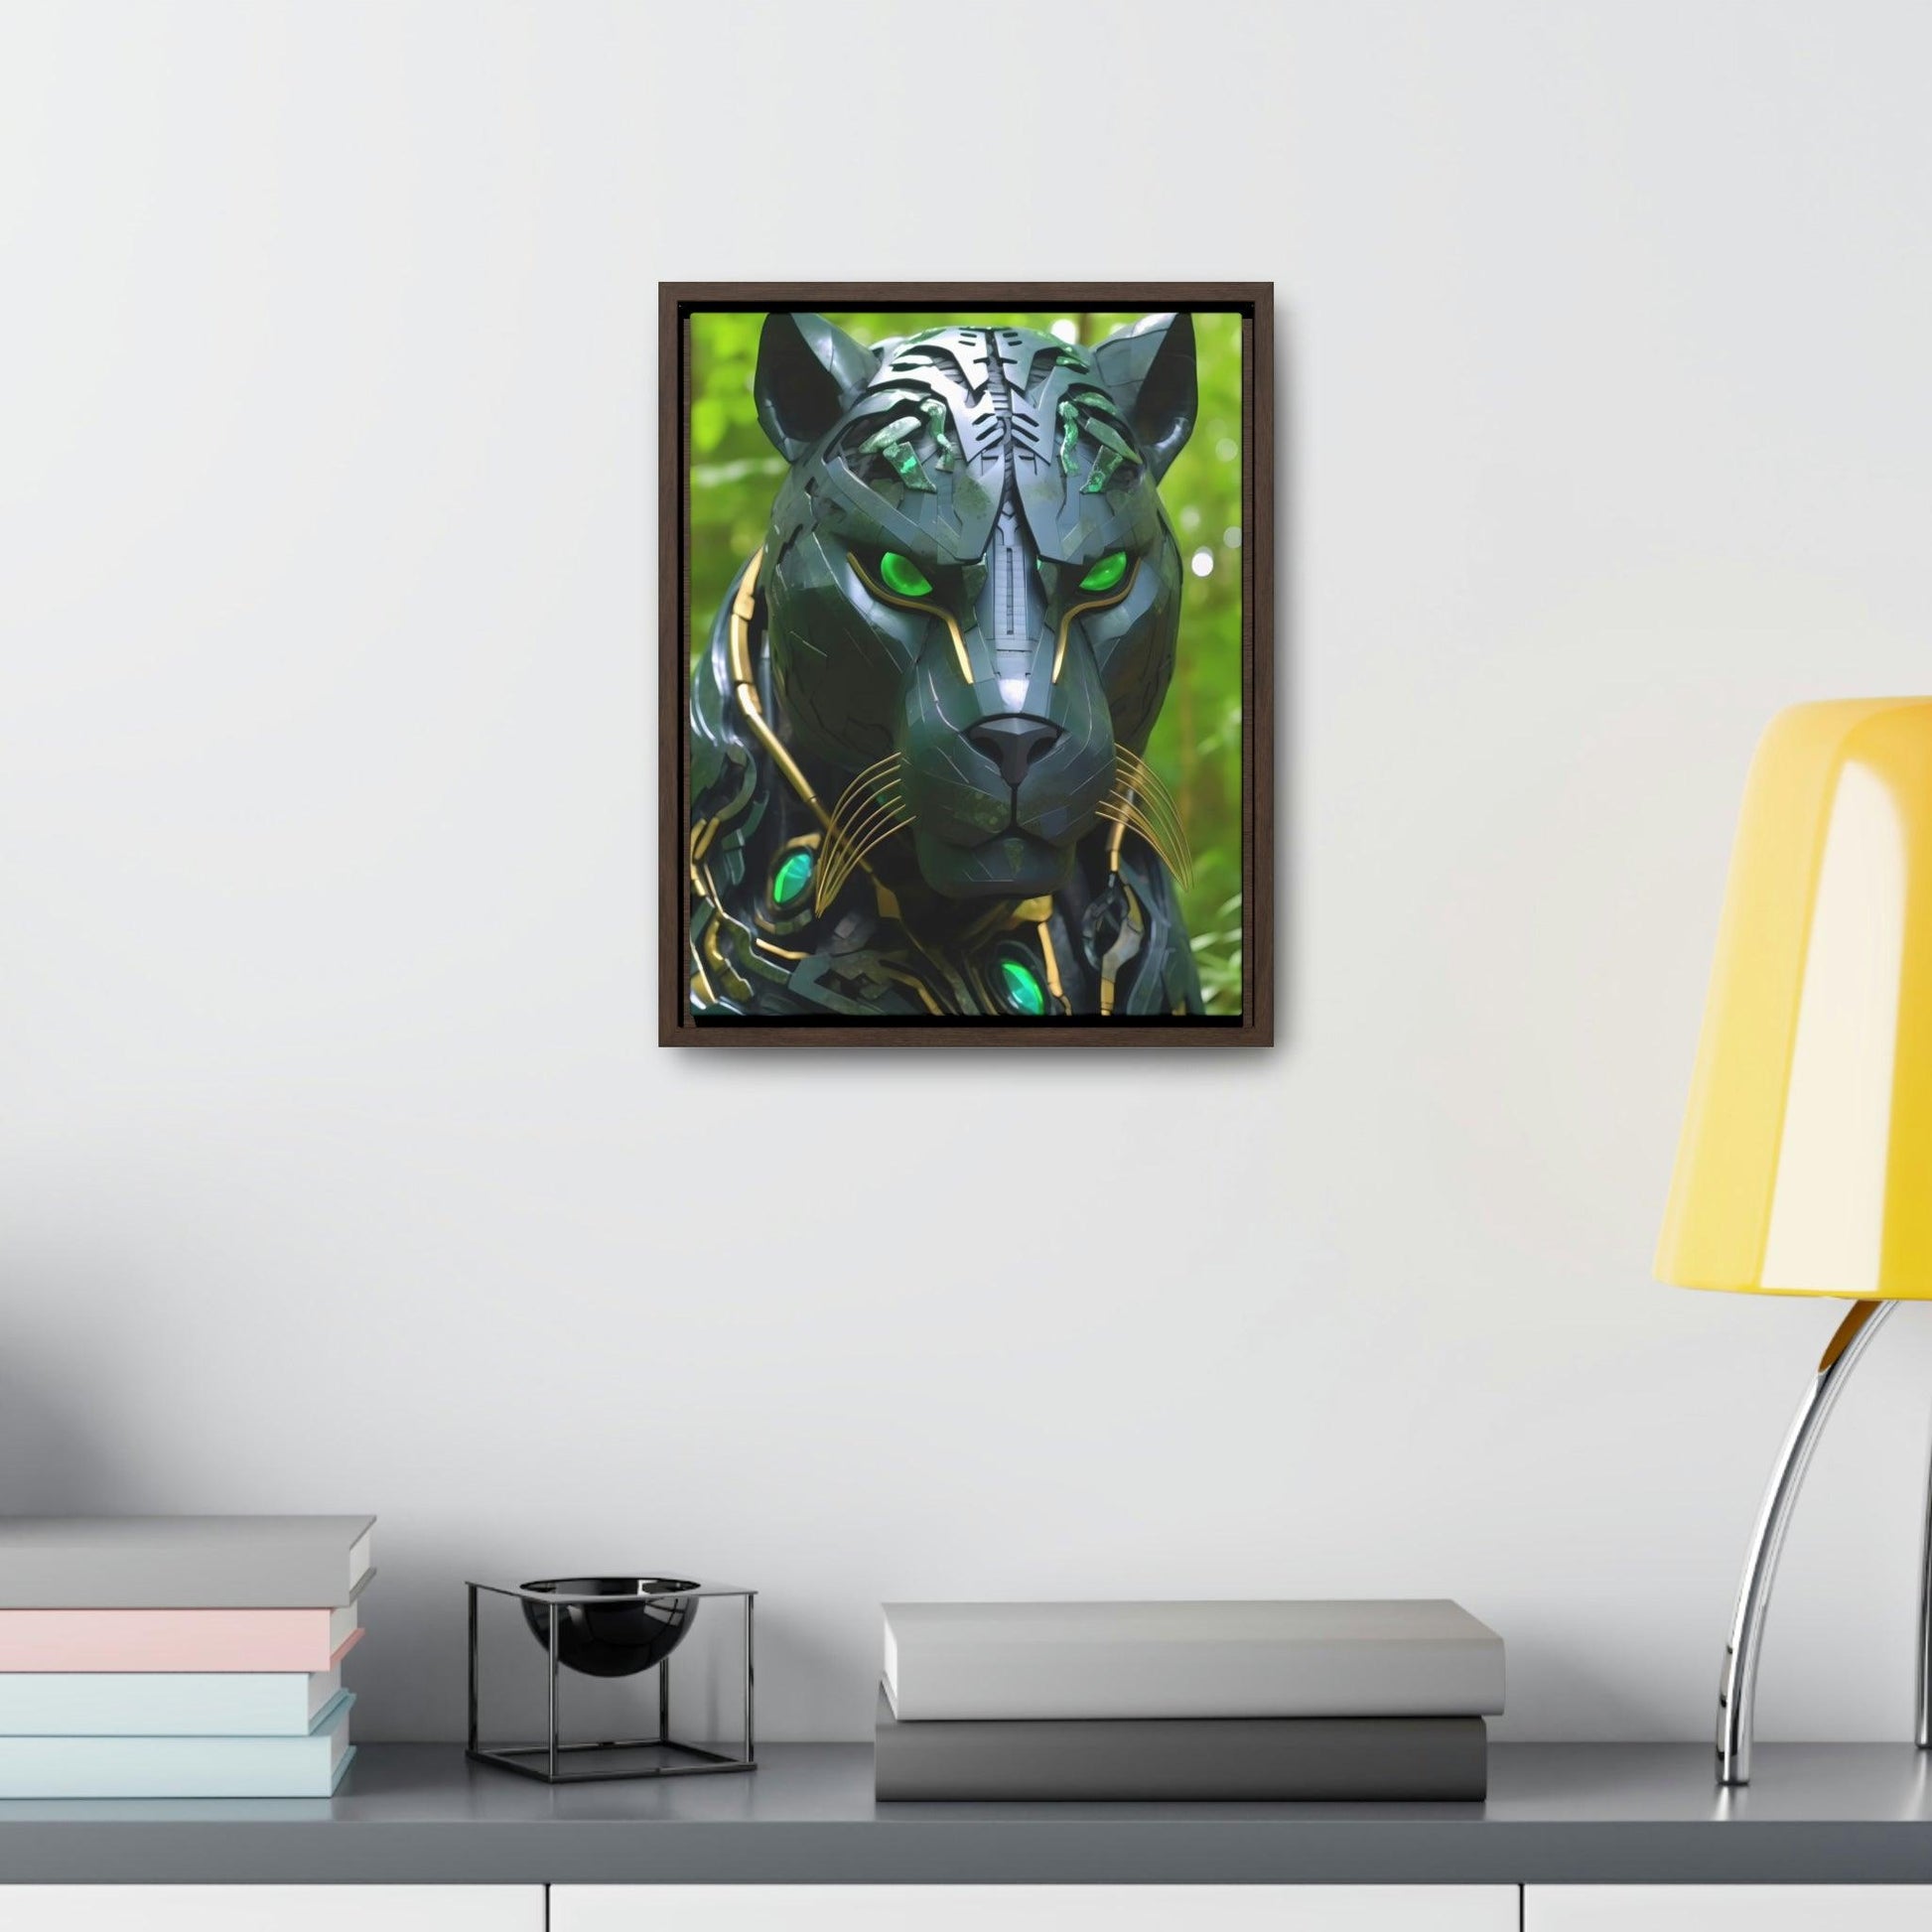 Obsidian Amazonian Black Panther Visionary Art Gallery Canvas Print - Home Decoration - Alchemystics.org